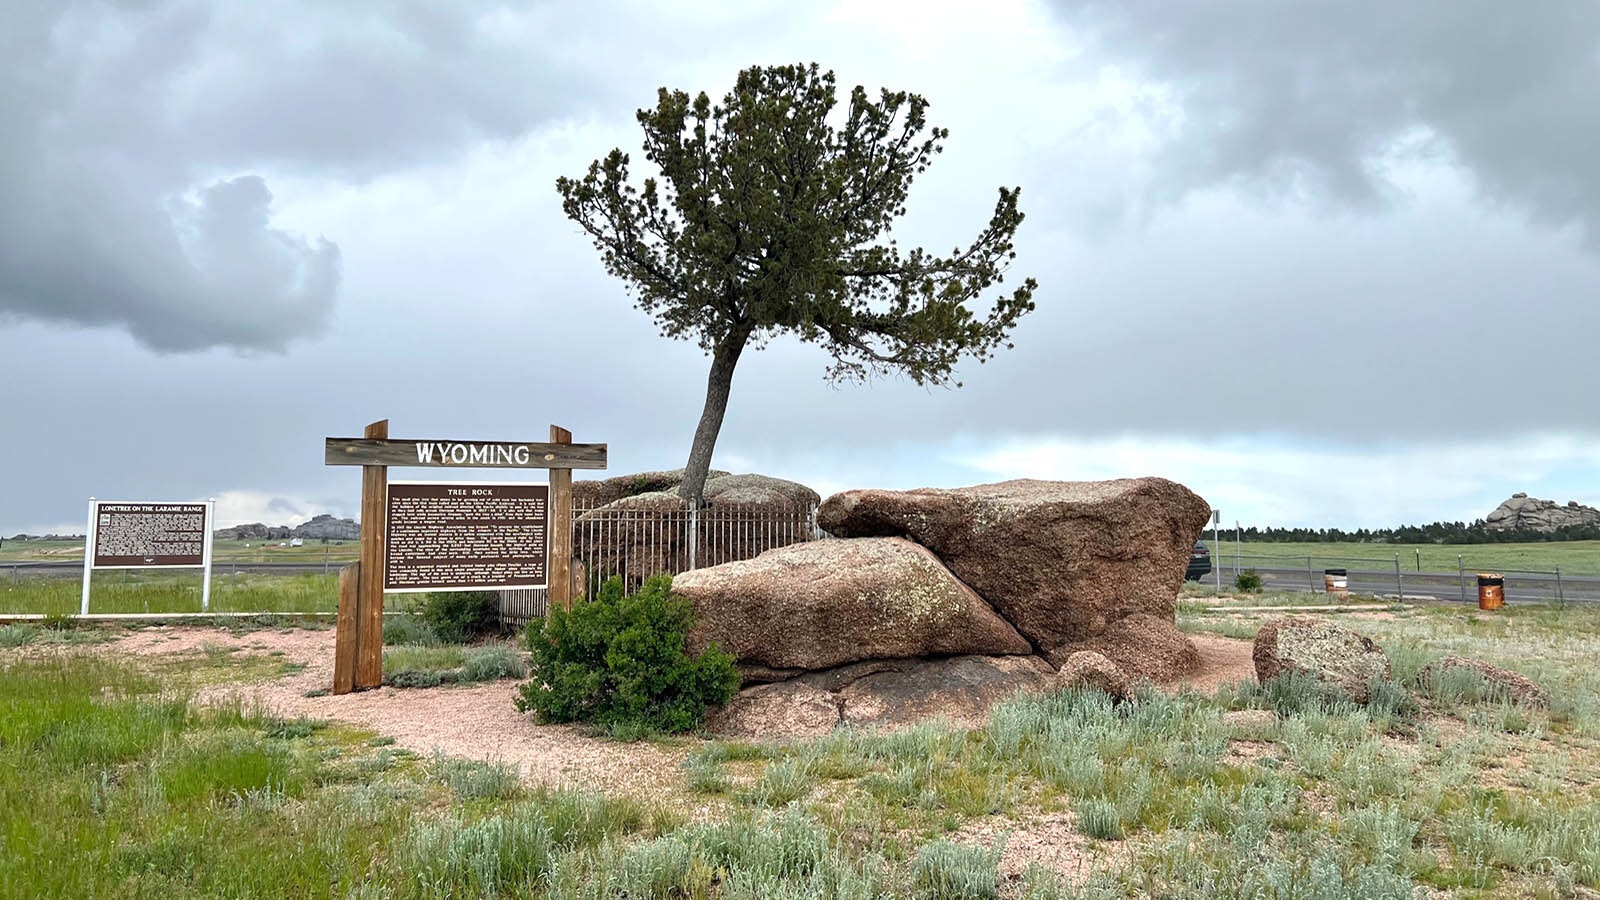 Tree Rock is a limber pine discovered growing out of a boulder in 1868 when the Union Pacific Railroad build the railroad 50 feet from it. It's now in the middle of Interstate 80 about 30 miles west of Cheyenne.